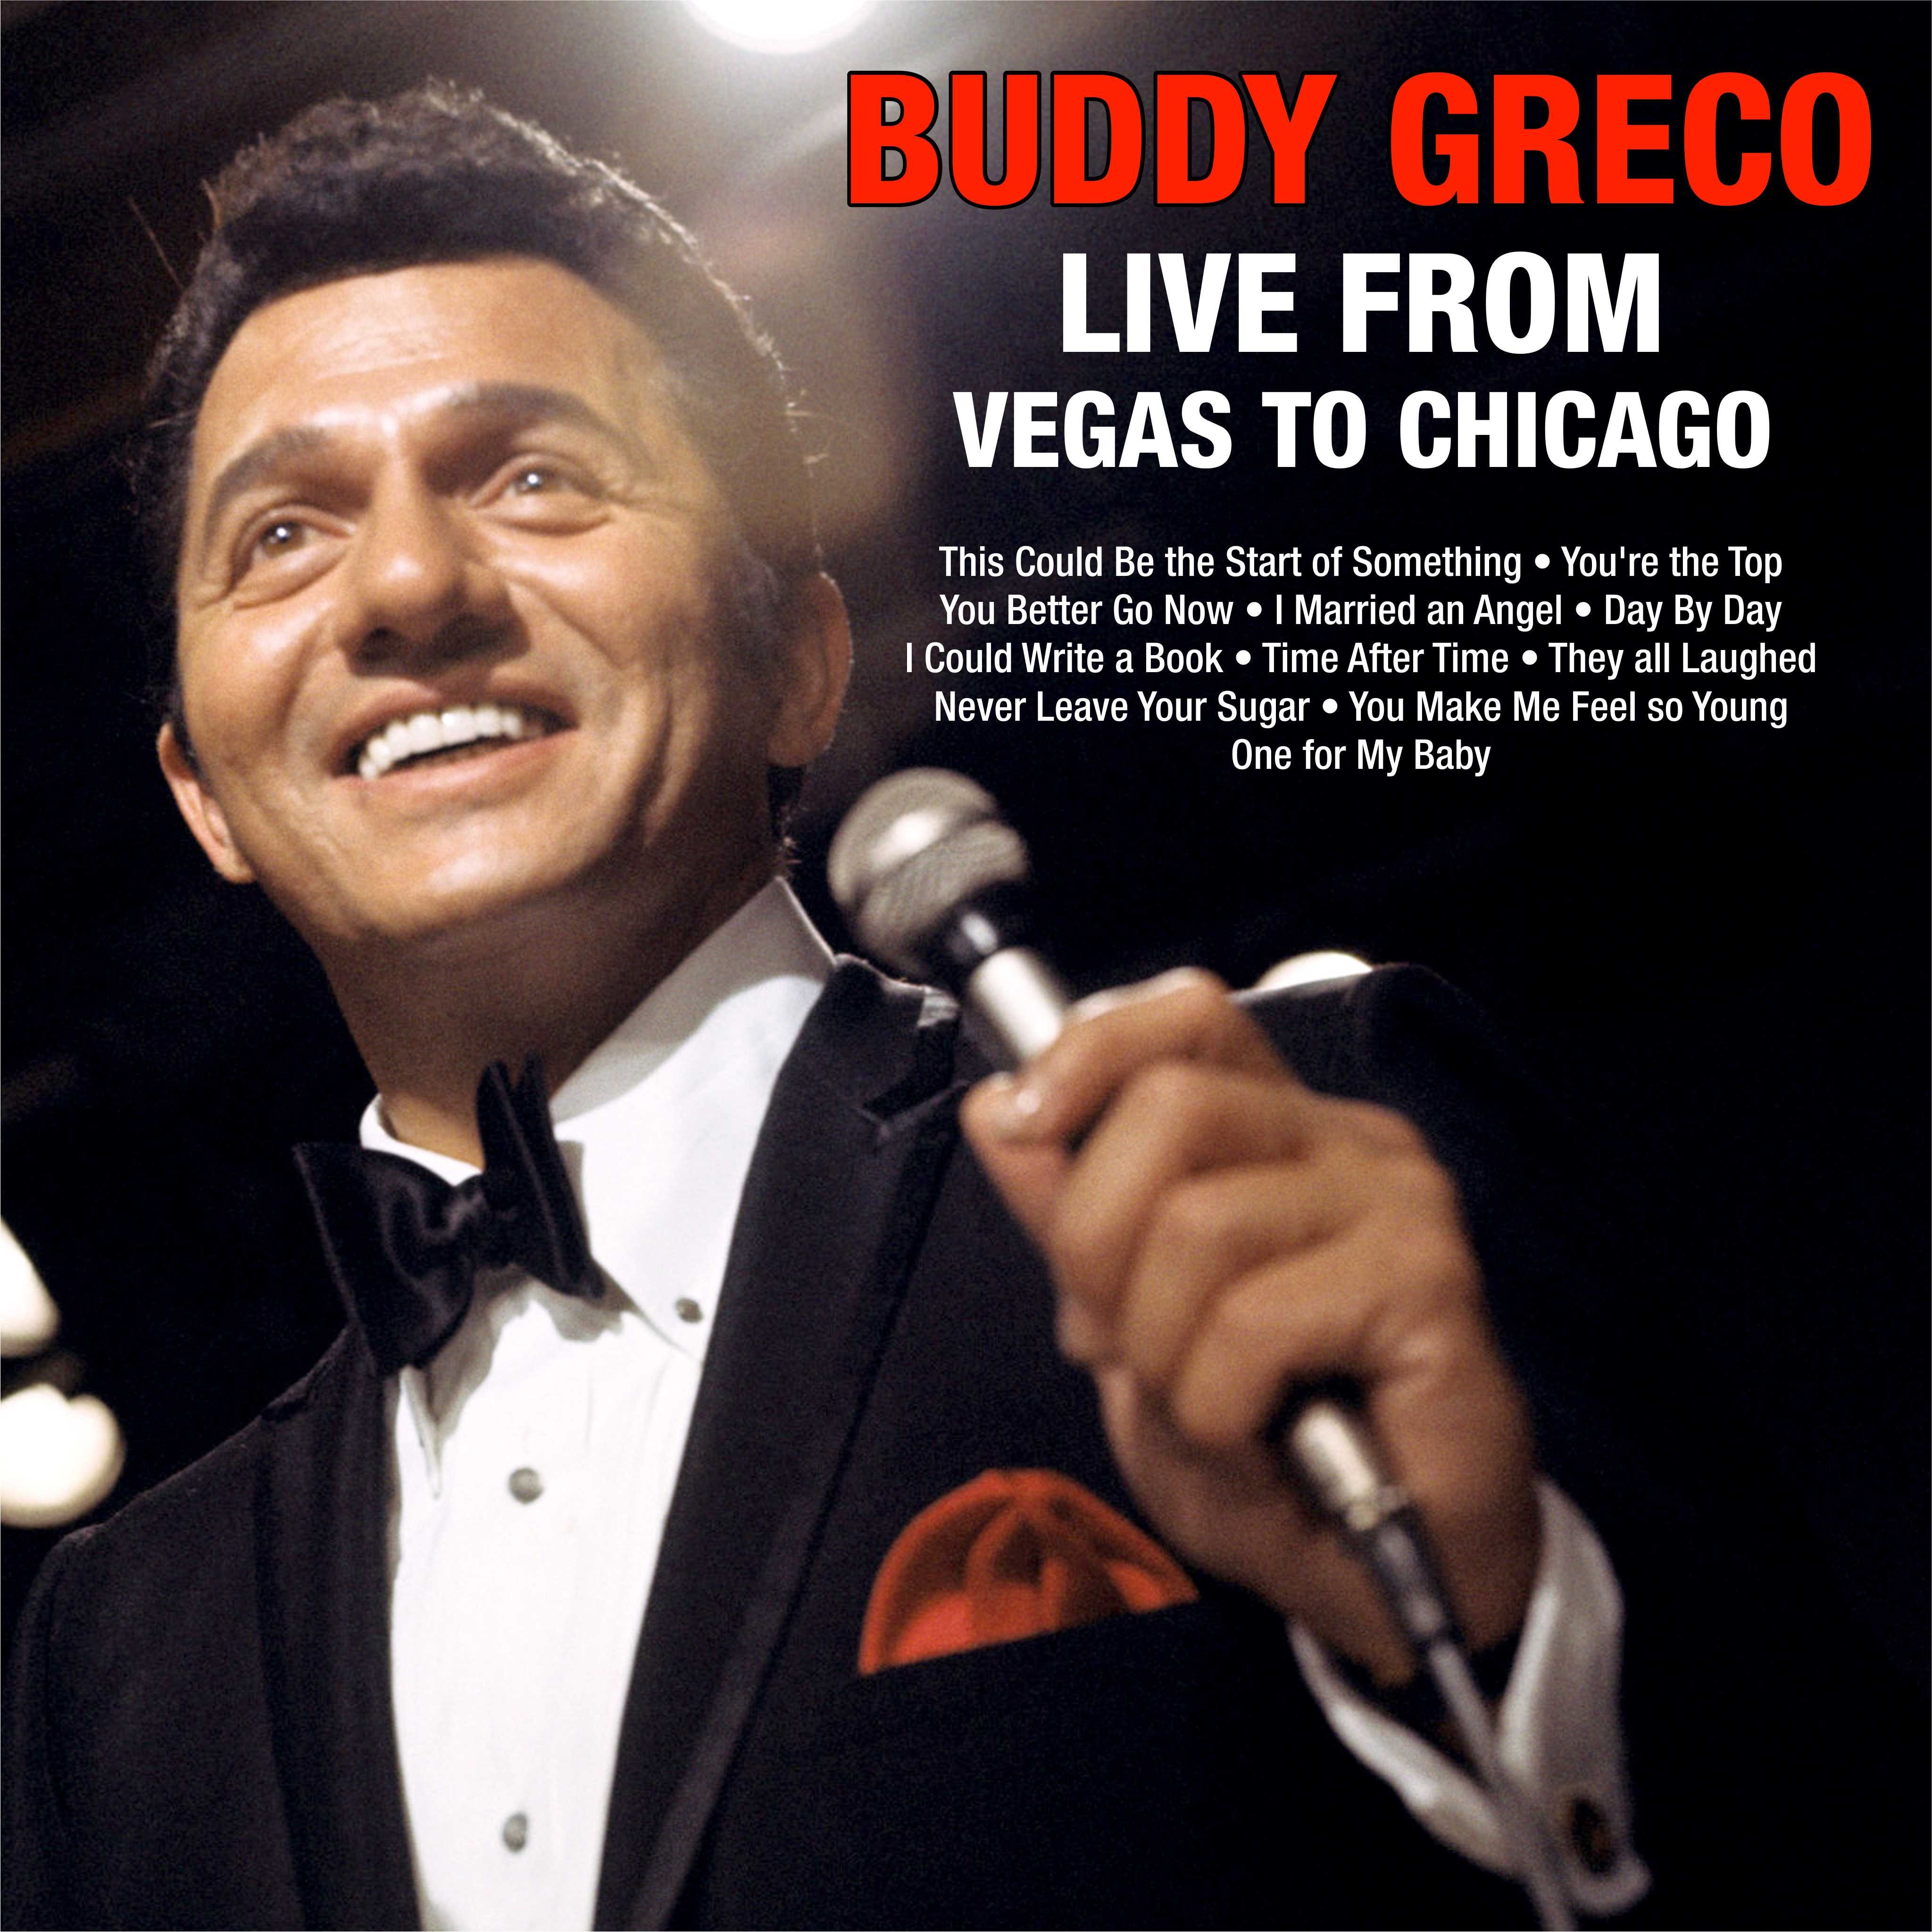 Buddy Greco Live From Vegas to Chicago